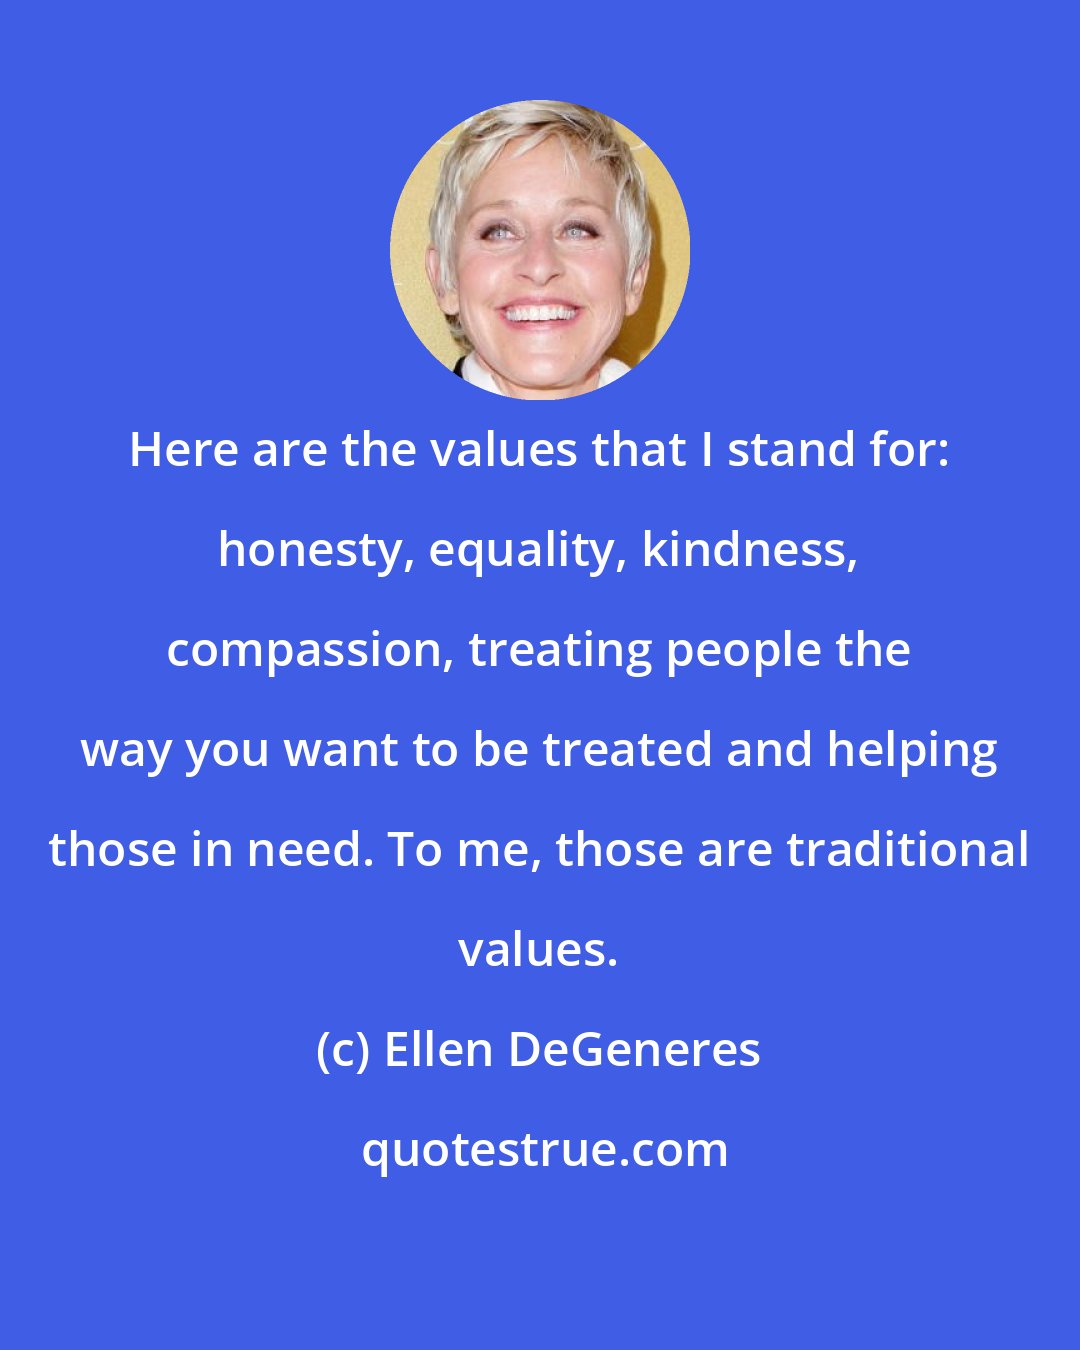 Ellen DeGeneres: Here are the values that I stand for: honesty, equality, kindness, compassion, treating people the way you want to be treated and helping those in need. To me, those are traditional values.